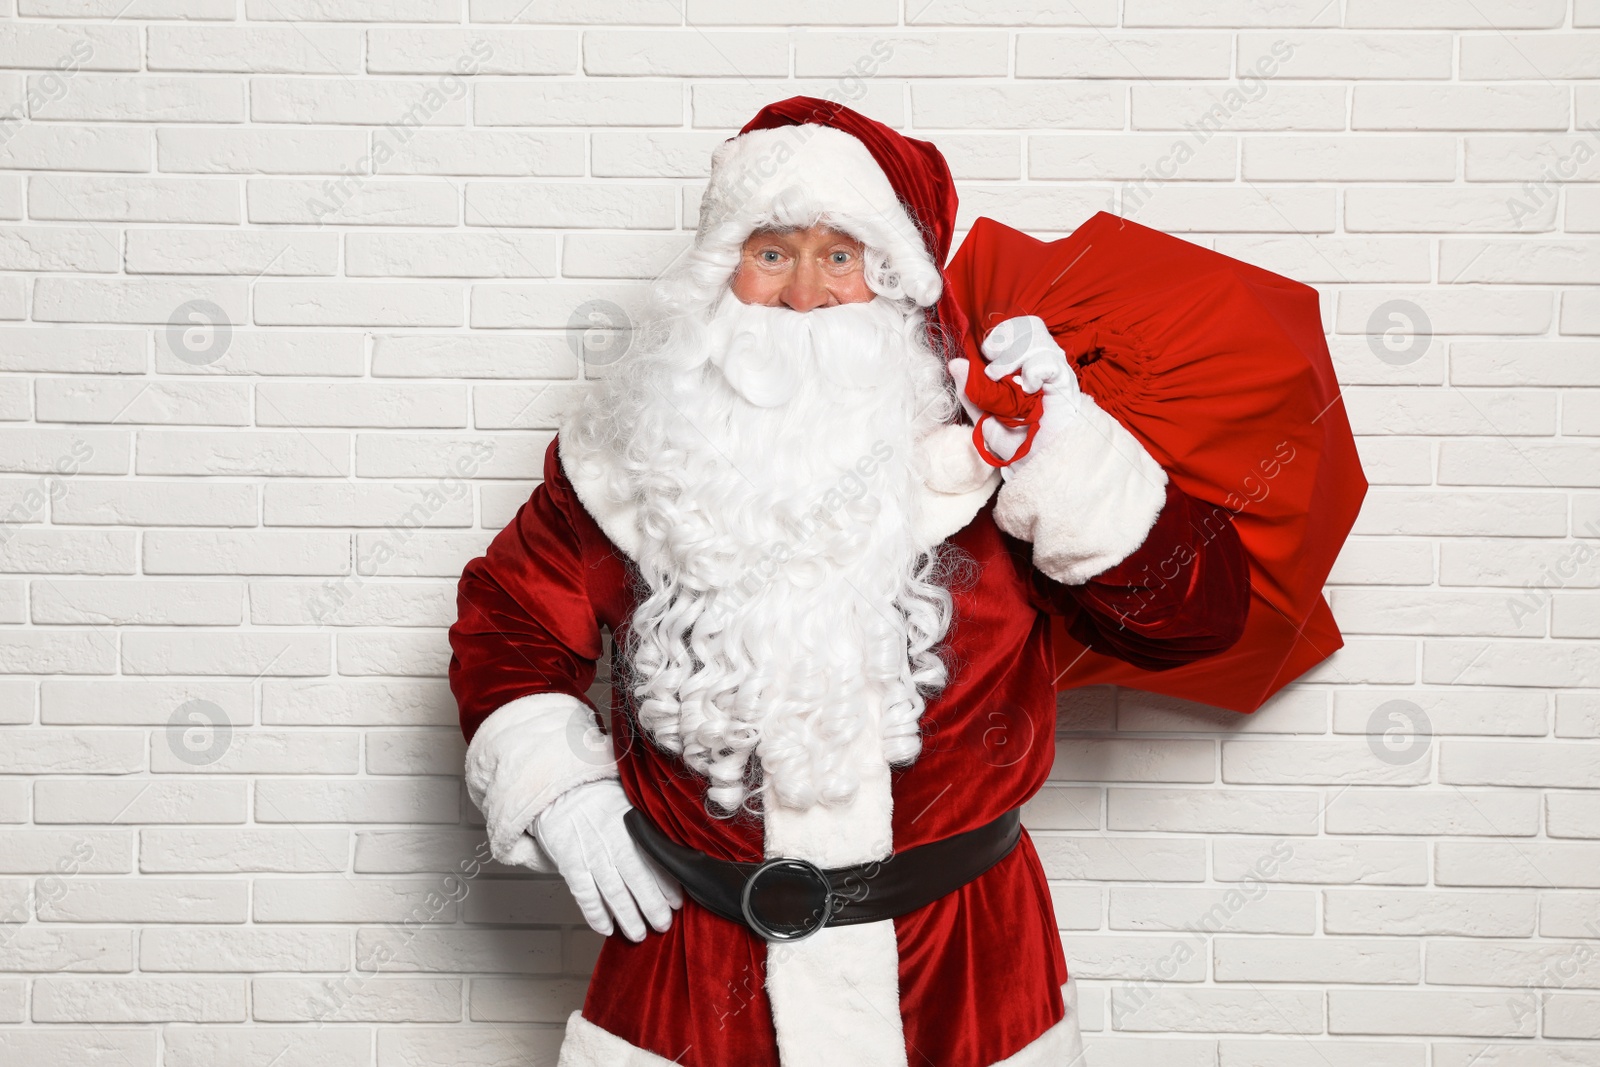 Photo of Authentic Santa Claus with bag full of gifts against white brick wall